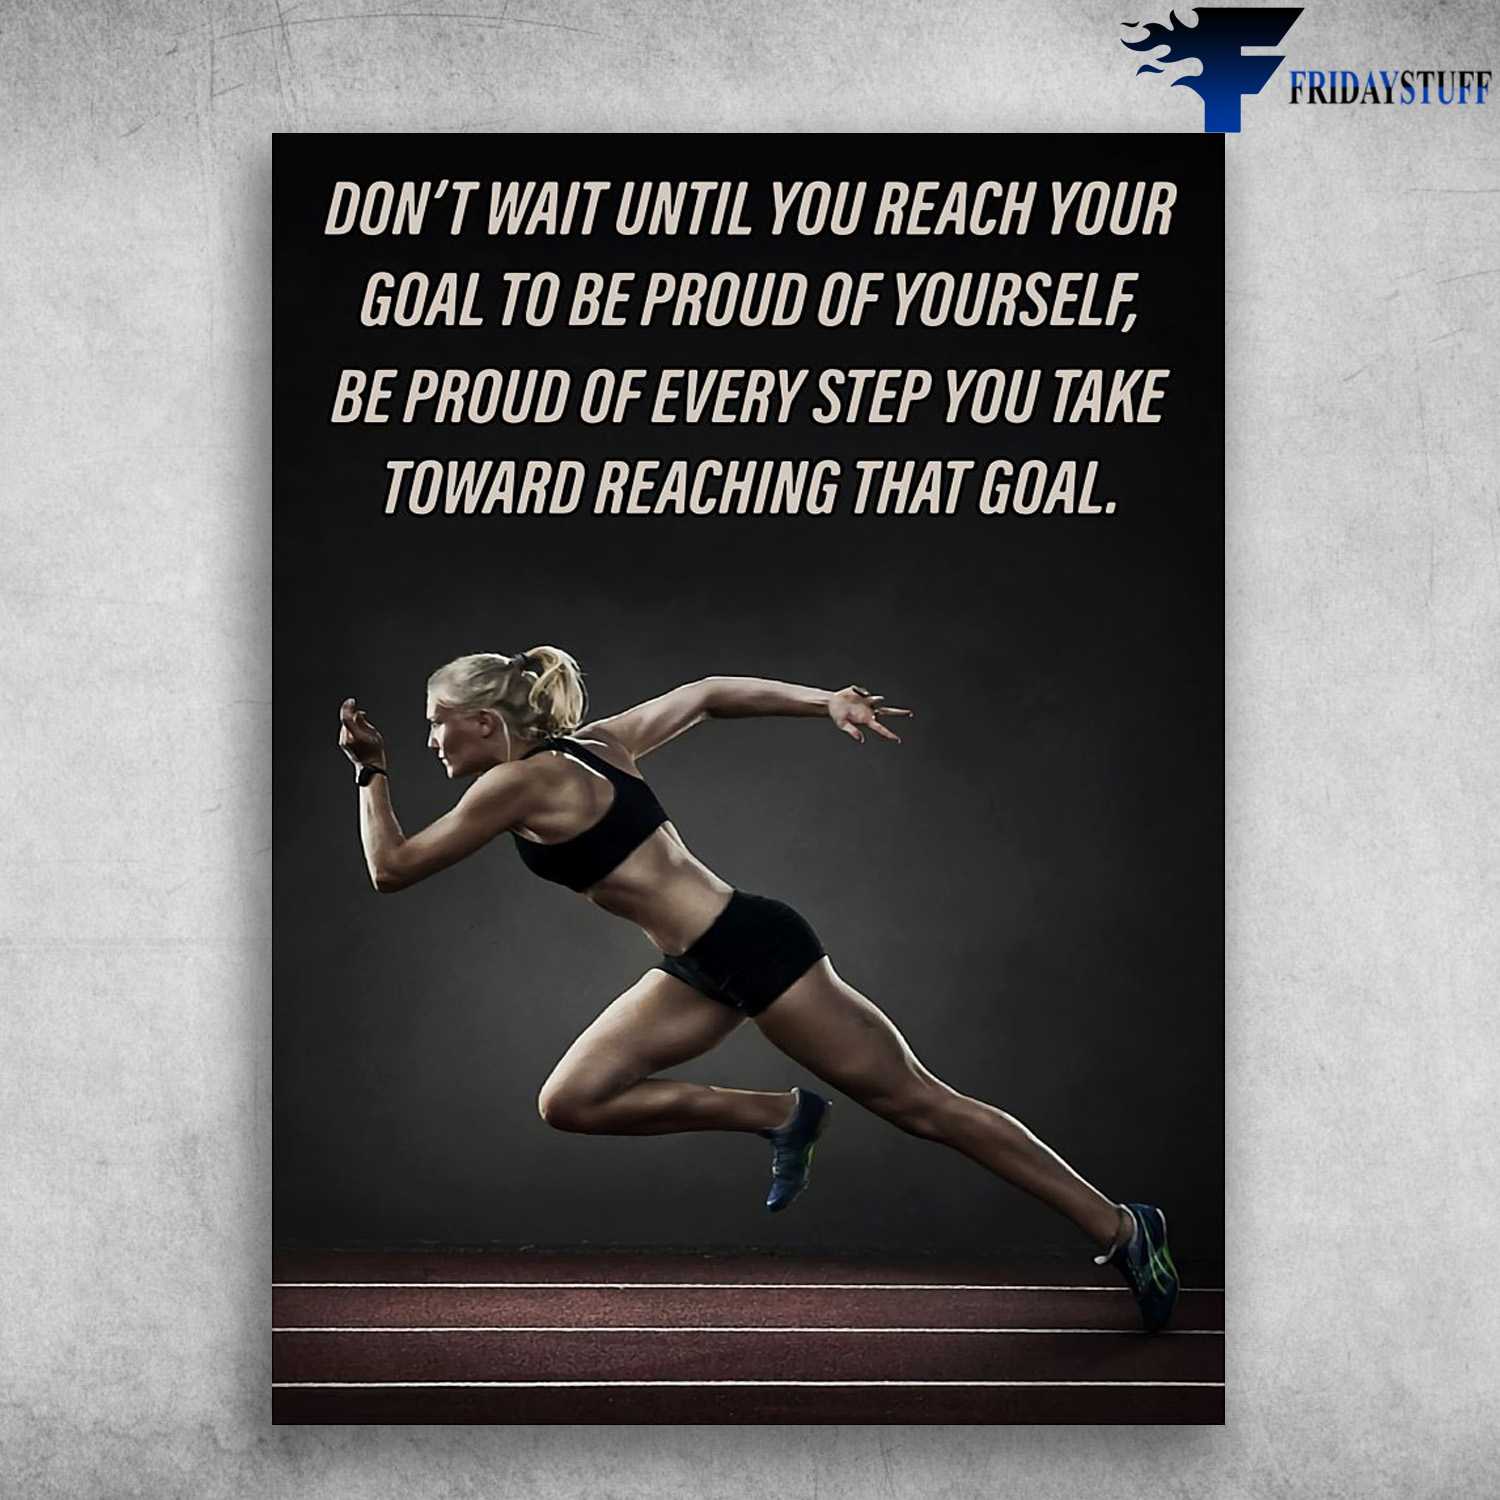 Running Poster, Running Girl - DOn't Wait Until You Reach Your, Goal To Be Proud Of Every Step You Take, Toward Reaching That Goal